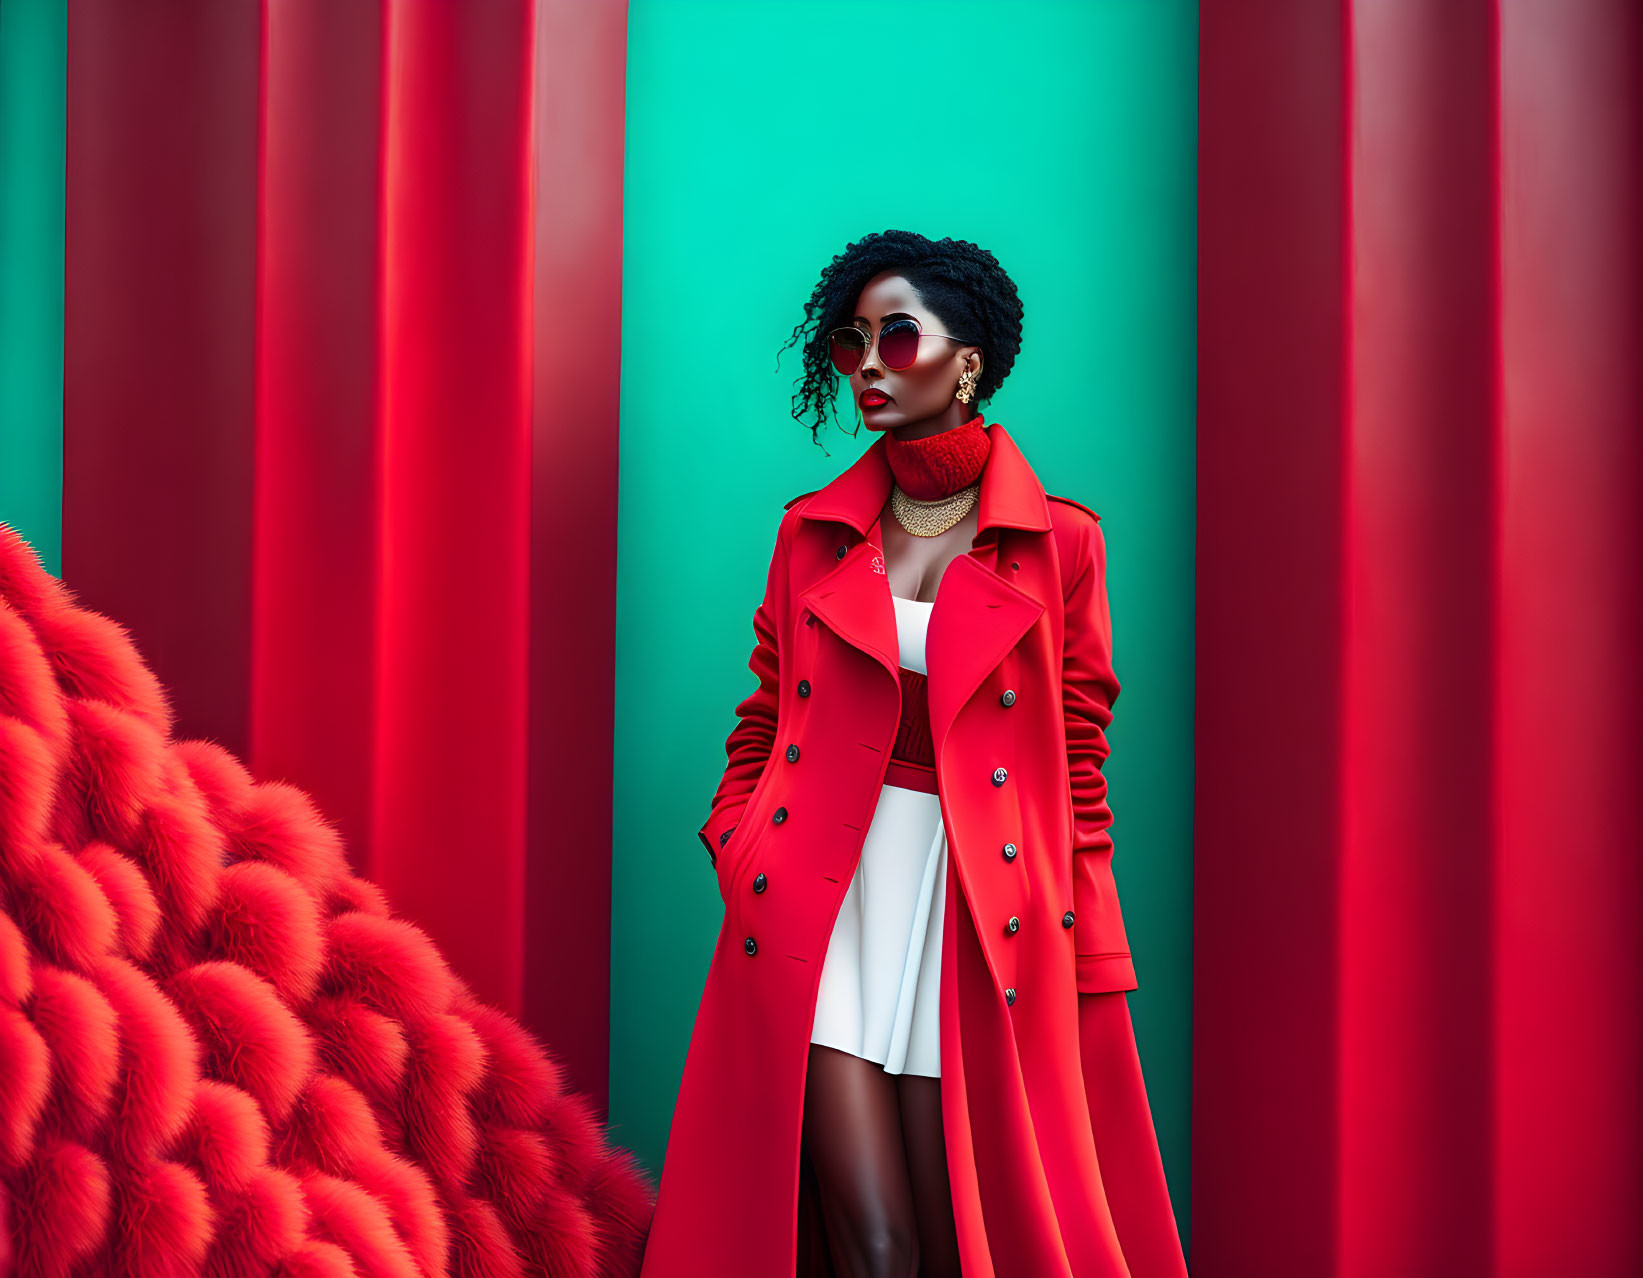 Woman in Red Coat and Sunglasses Against Green and Red Striped Background